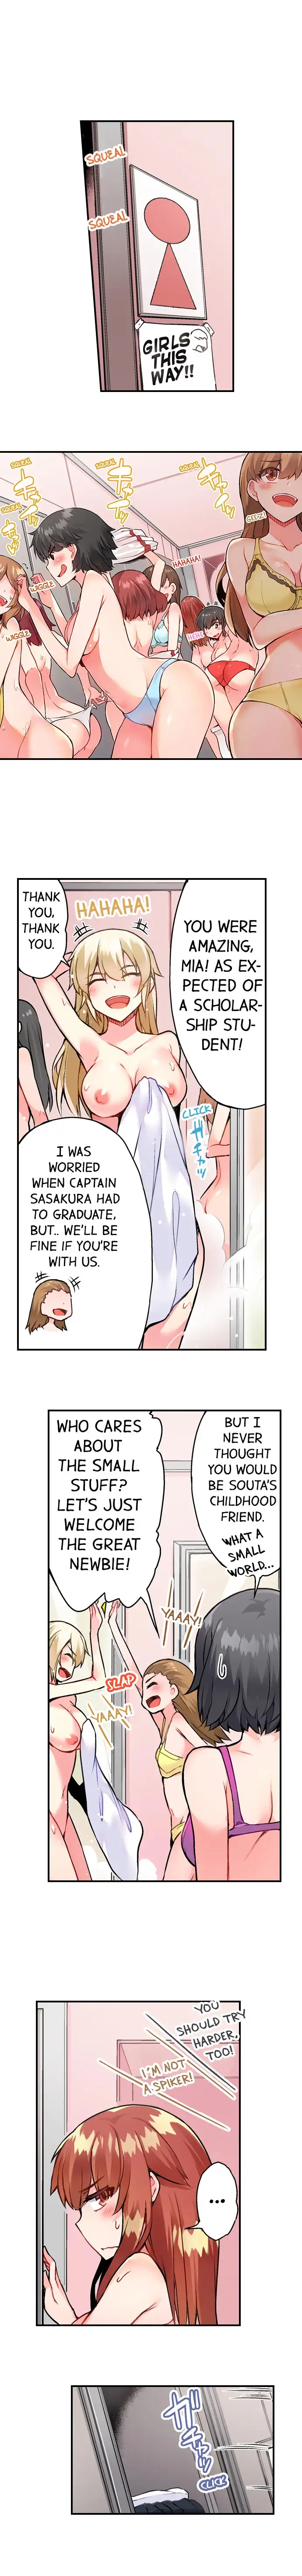 Traditional Job of Washing Girls’ Body - Chapter 63 Page 5